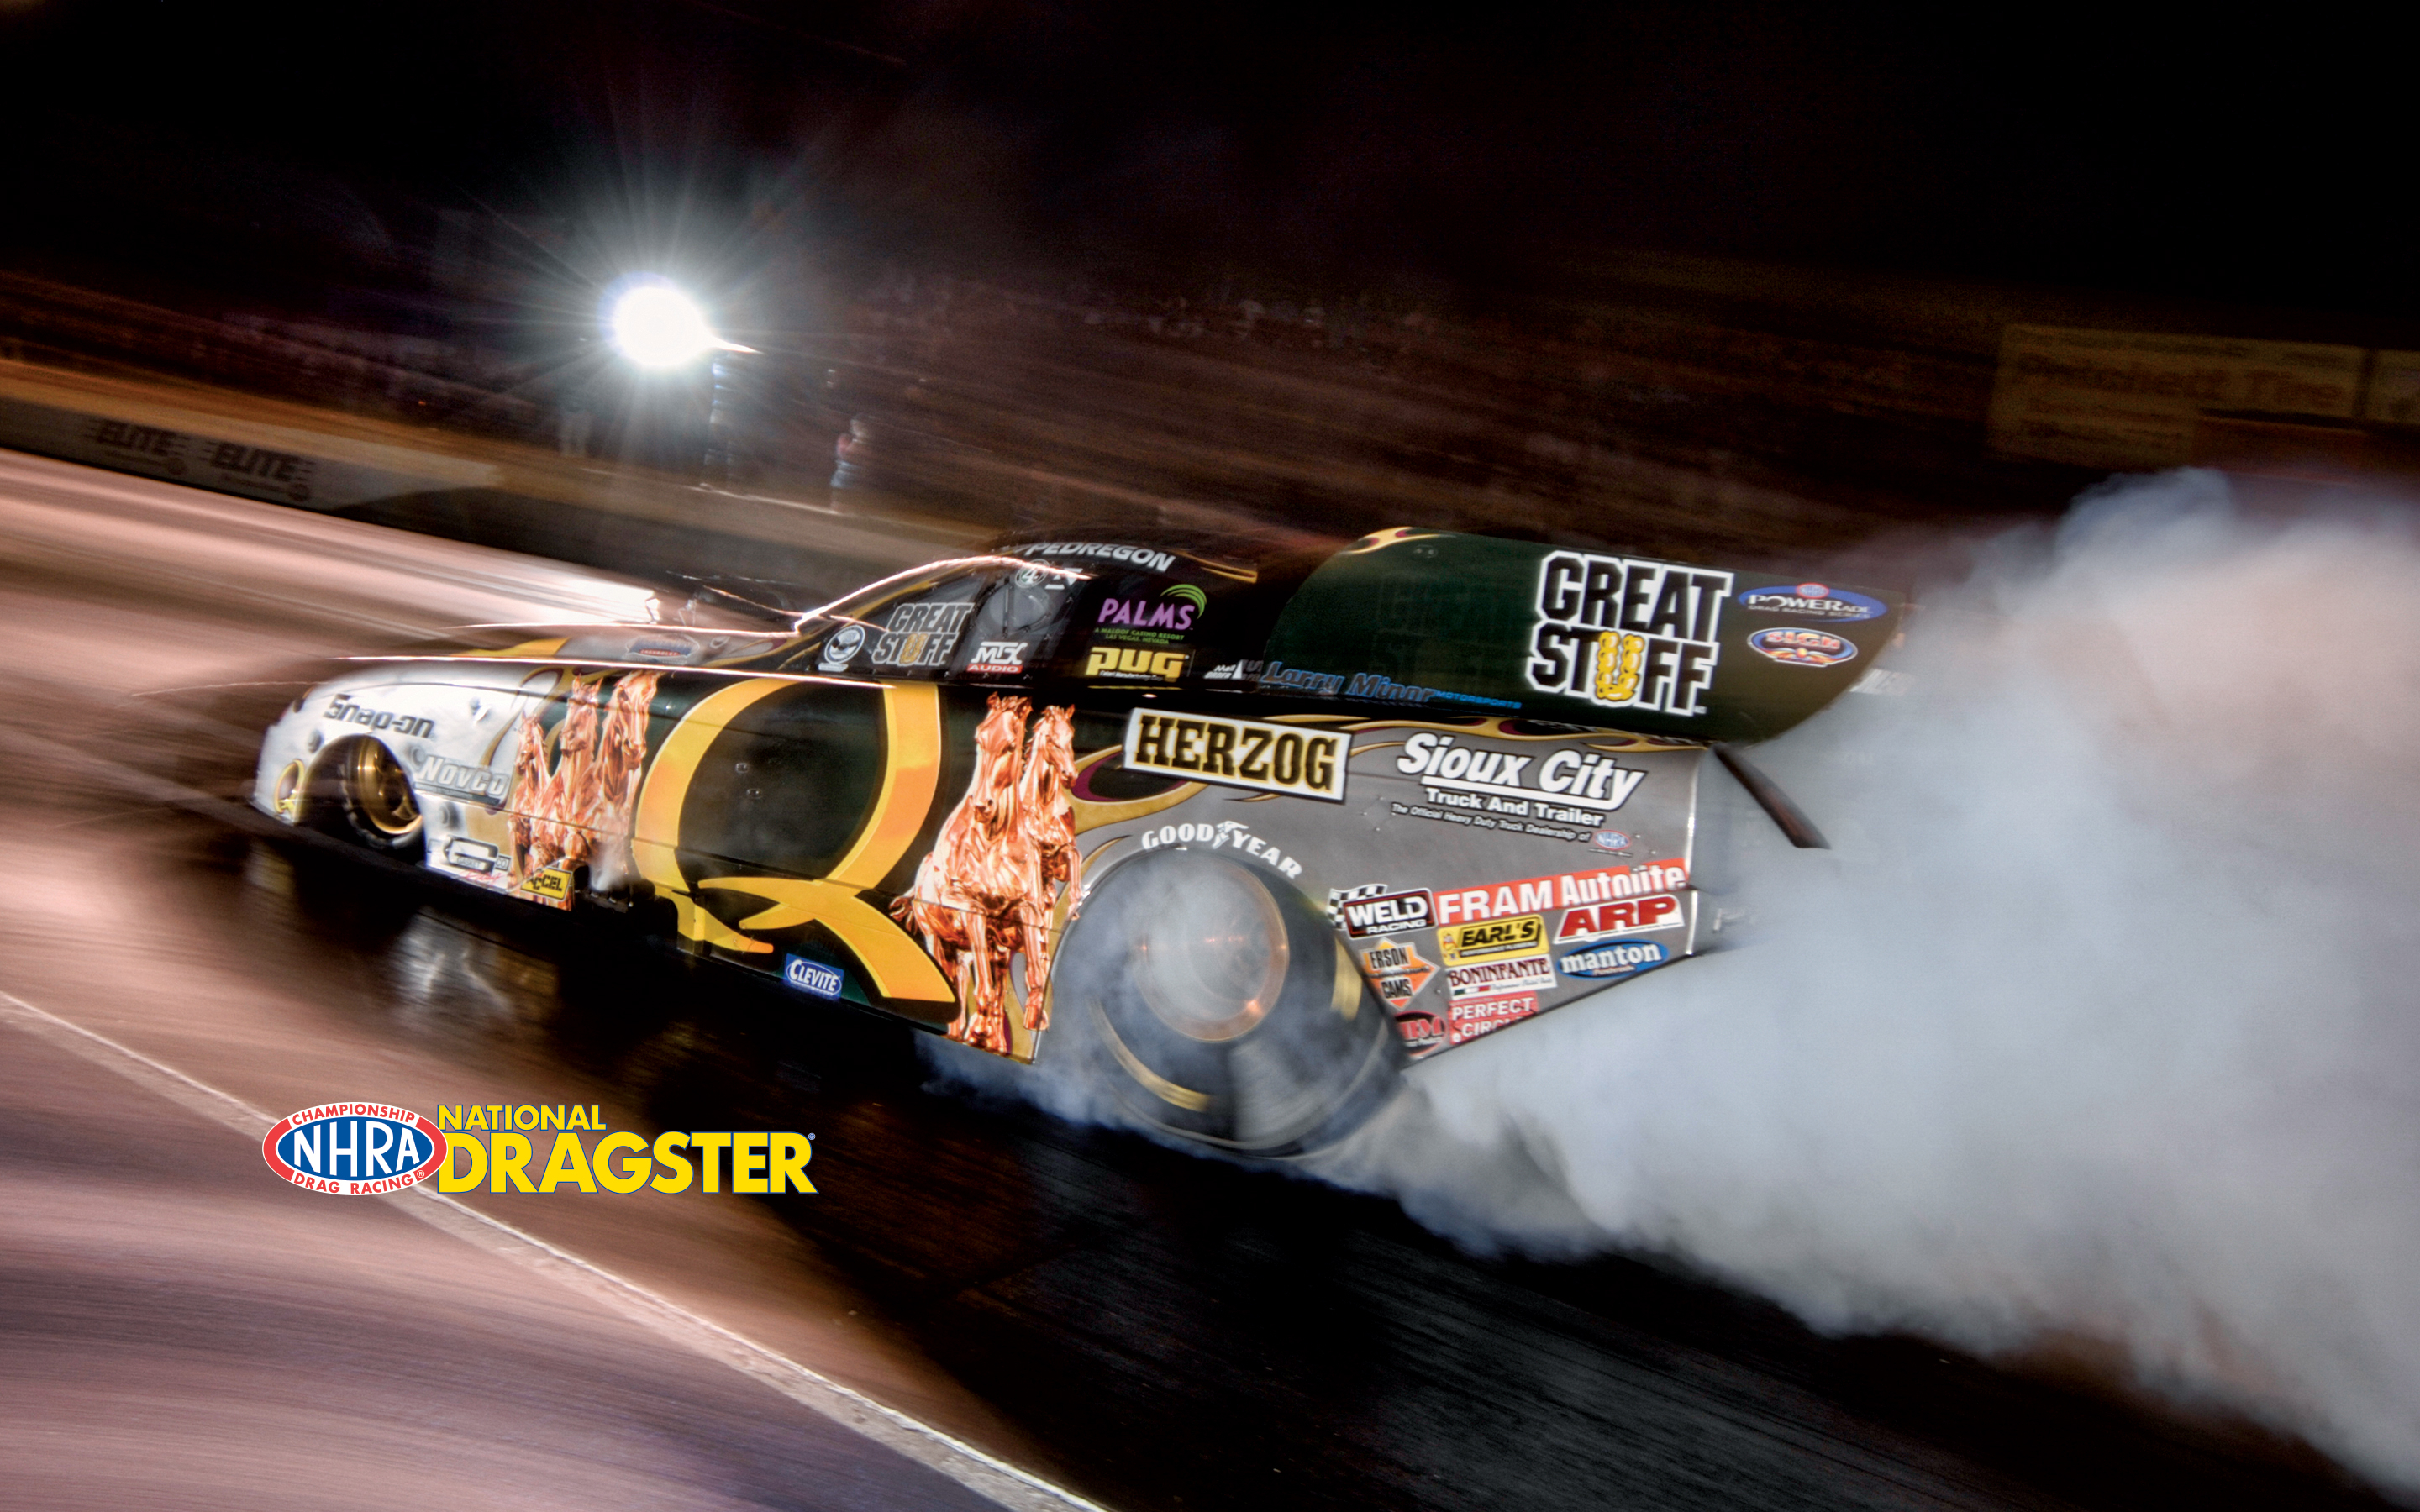 2880x1800 NHRA National Dragster wallpaper images (Issue 09, 2020) | NHRA